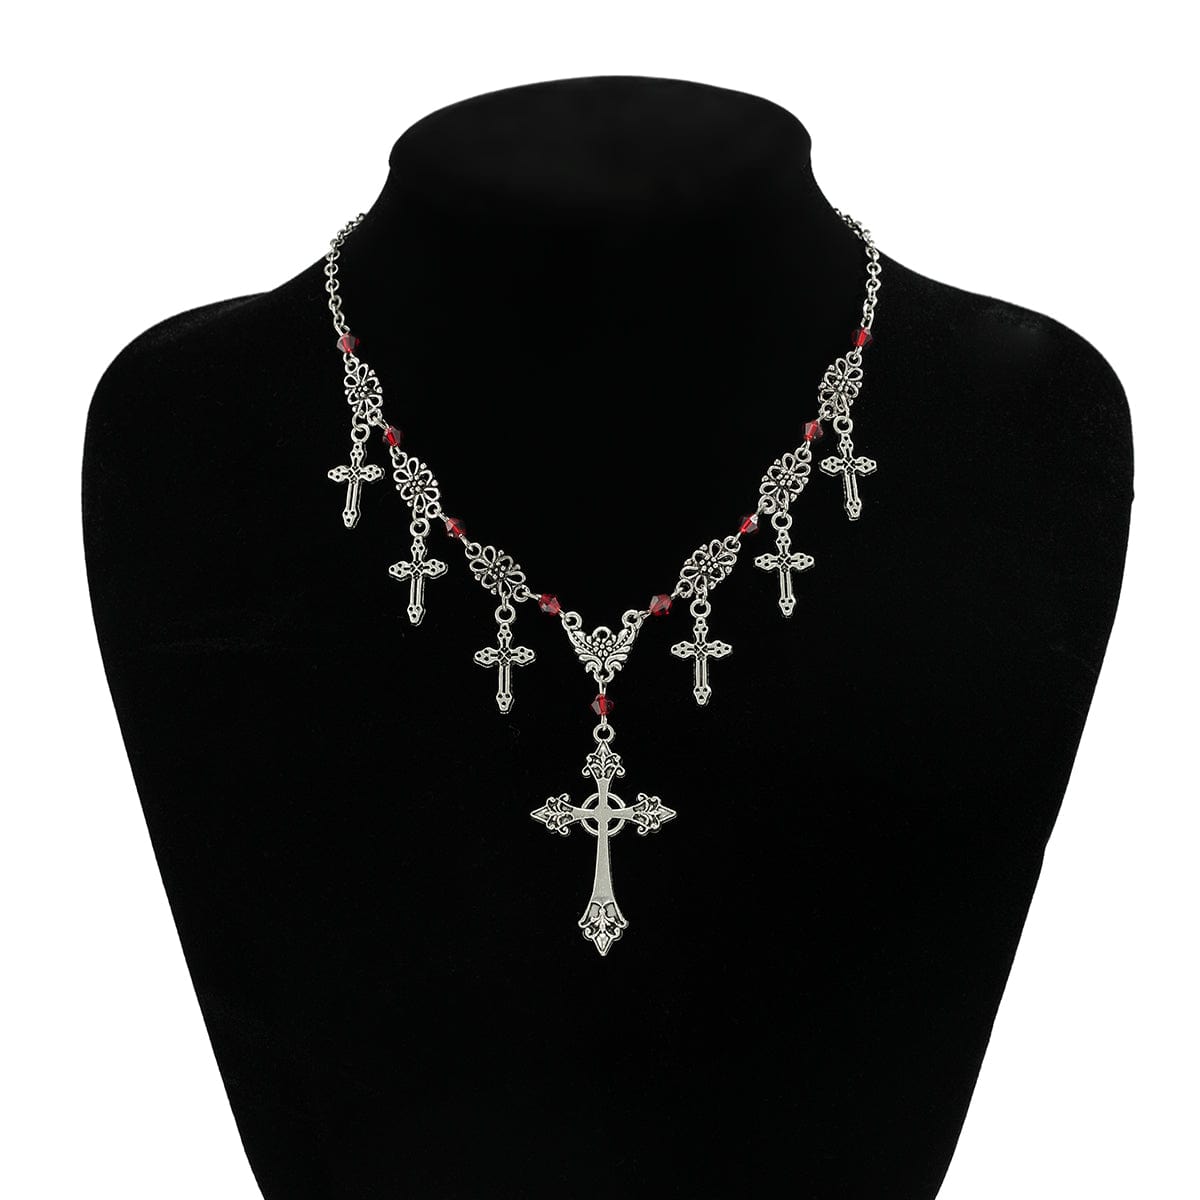 Chic Crystal Charm Antique Cross Tassel Necklace